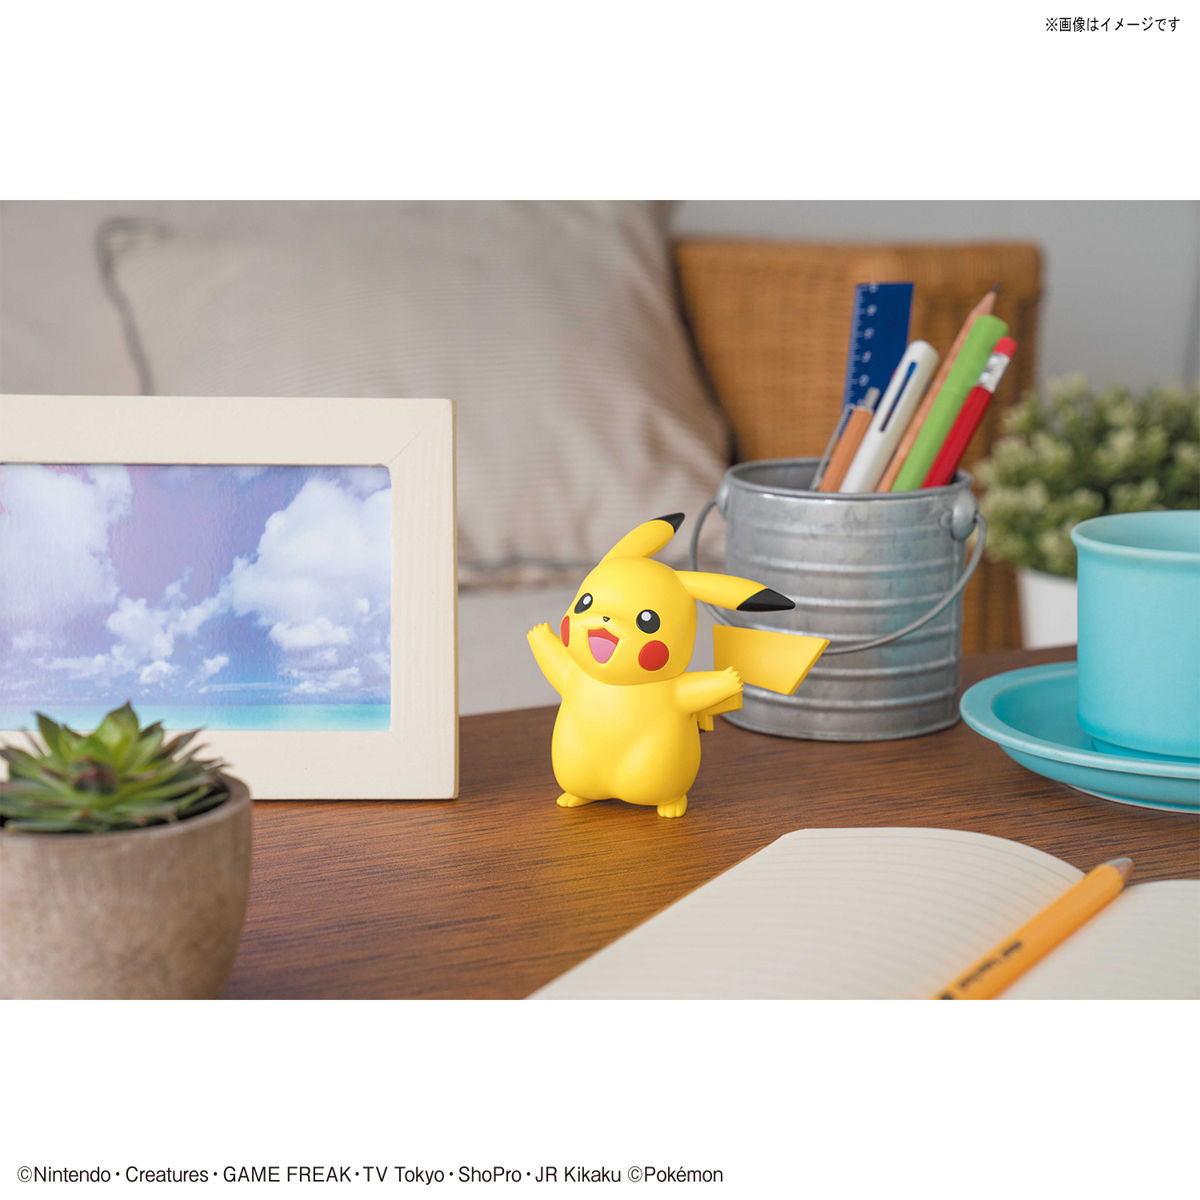 Pokémon - Pikachu - Pokémon Model Kit Quick!! Collection No. 01 (Bandai), Easy and simple assembly, Pikachu model approximately 75mm in length with 15 parts, no tools required, minimal use of stickers, Nippon Figures